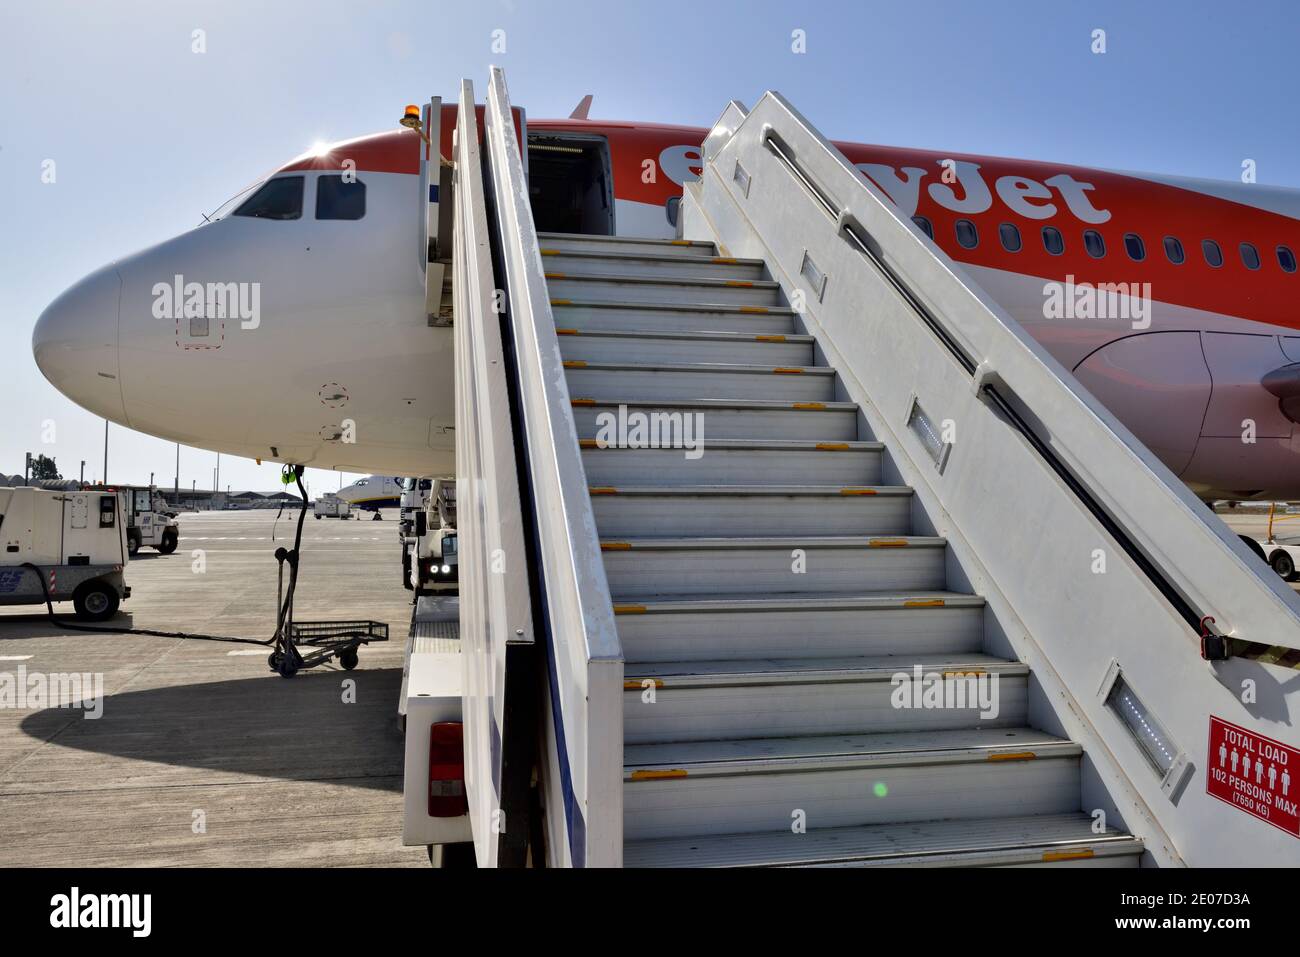 Airplane (Airbus A319/320) boarding stairs Stock Photo